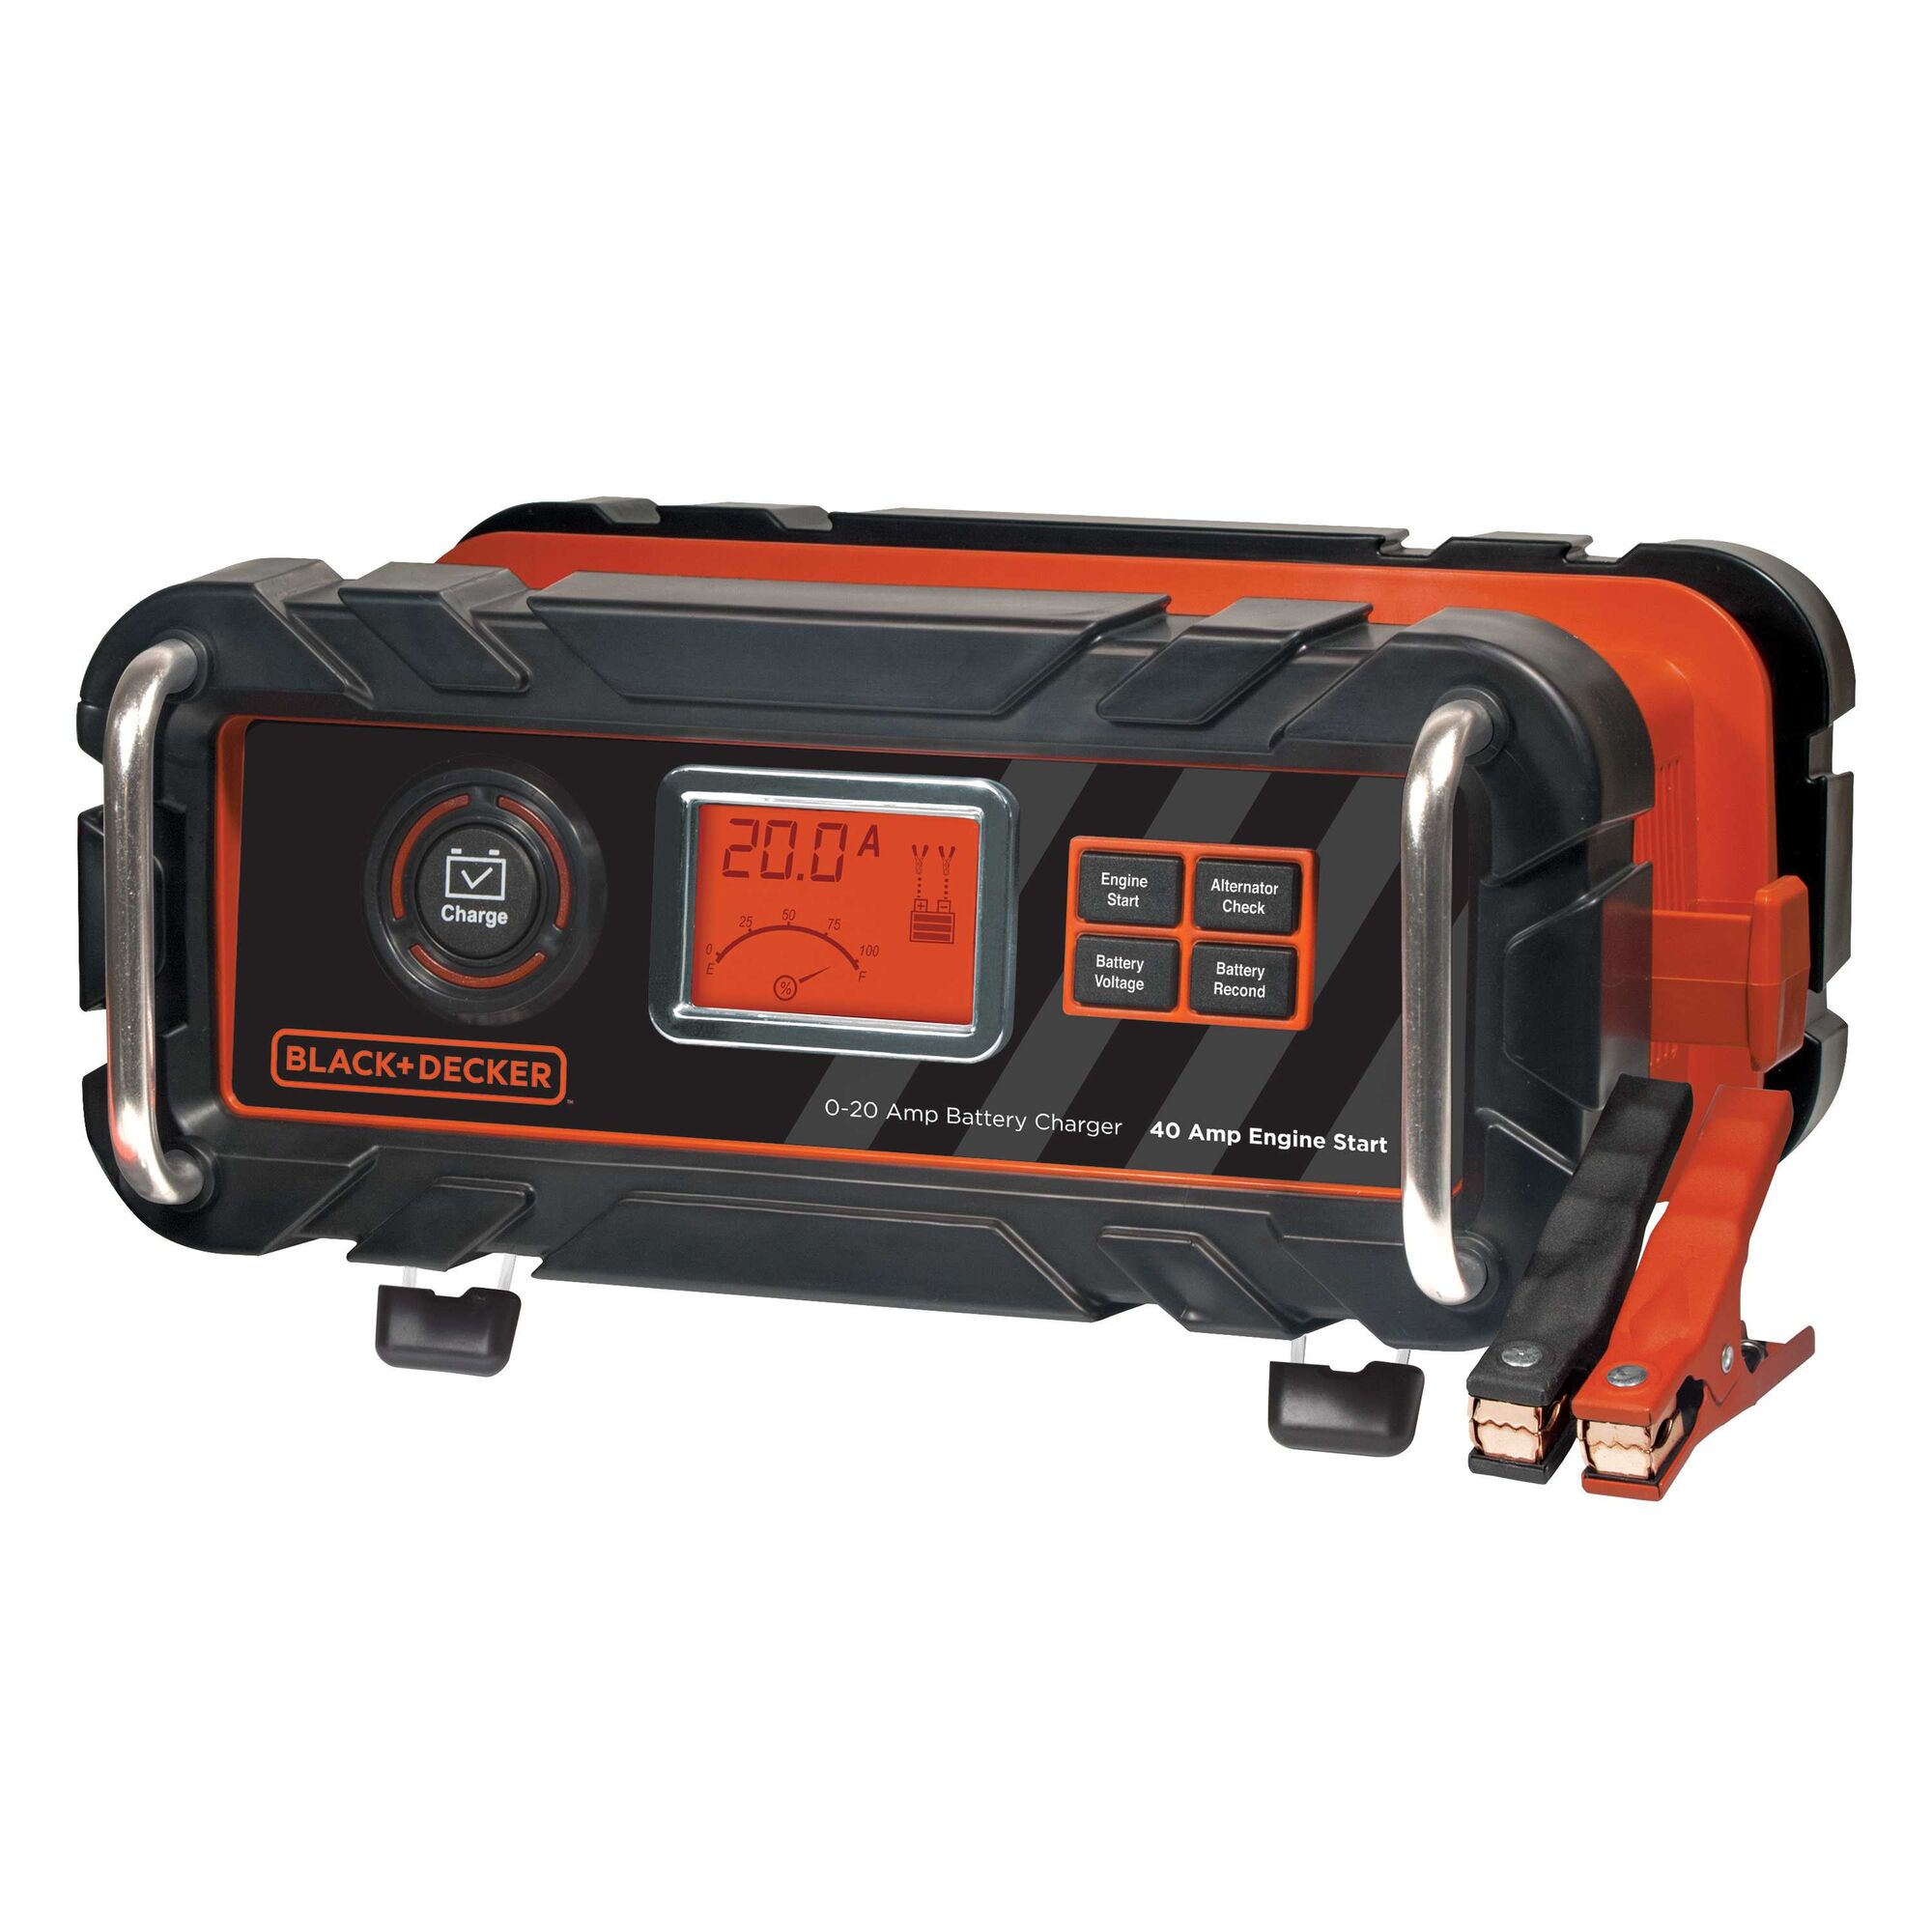 25 Amp bench battery charger with 75 Amp engine start and patented alternator check.